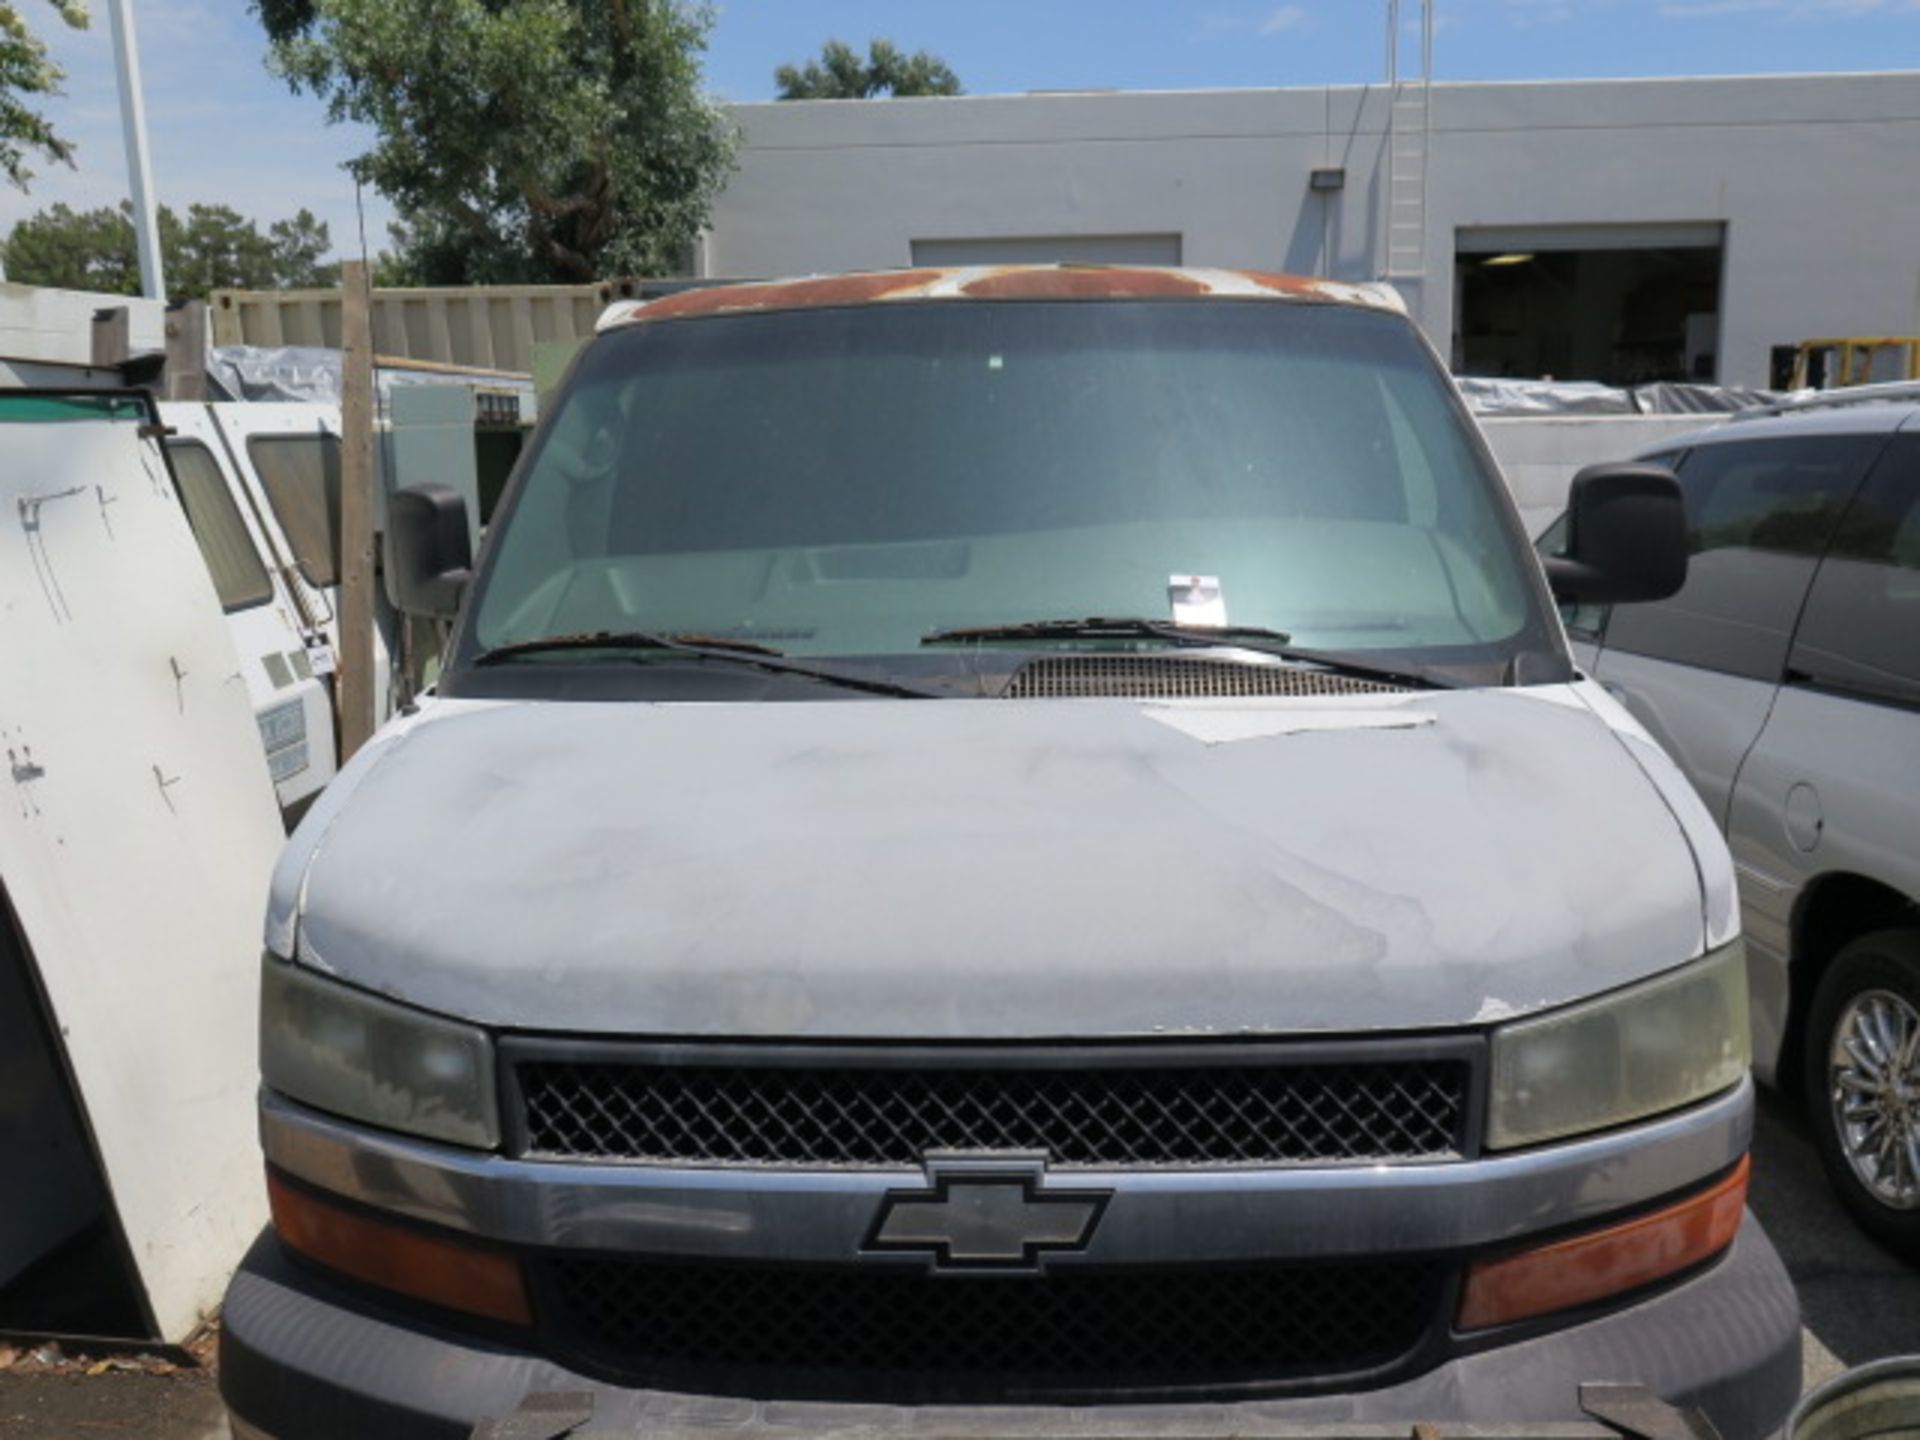 2006 Chevrolet 2500 Express Carbo Van (NEEDS NEW ENGINE) Lisc# 7X59077 w/ Auto Trans, SOLD AS IS - Image 2 of 7